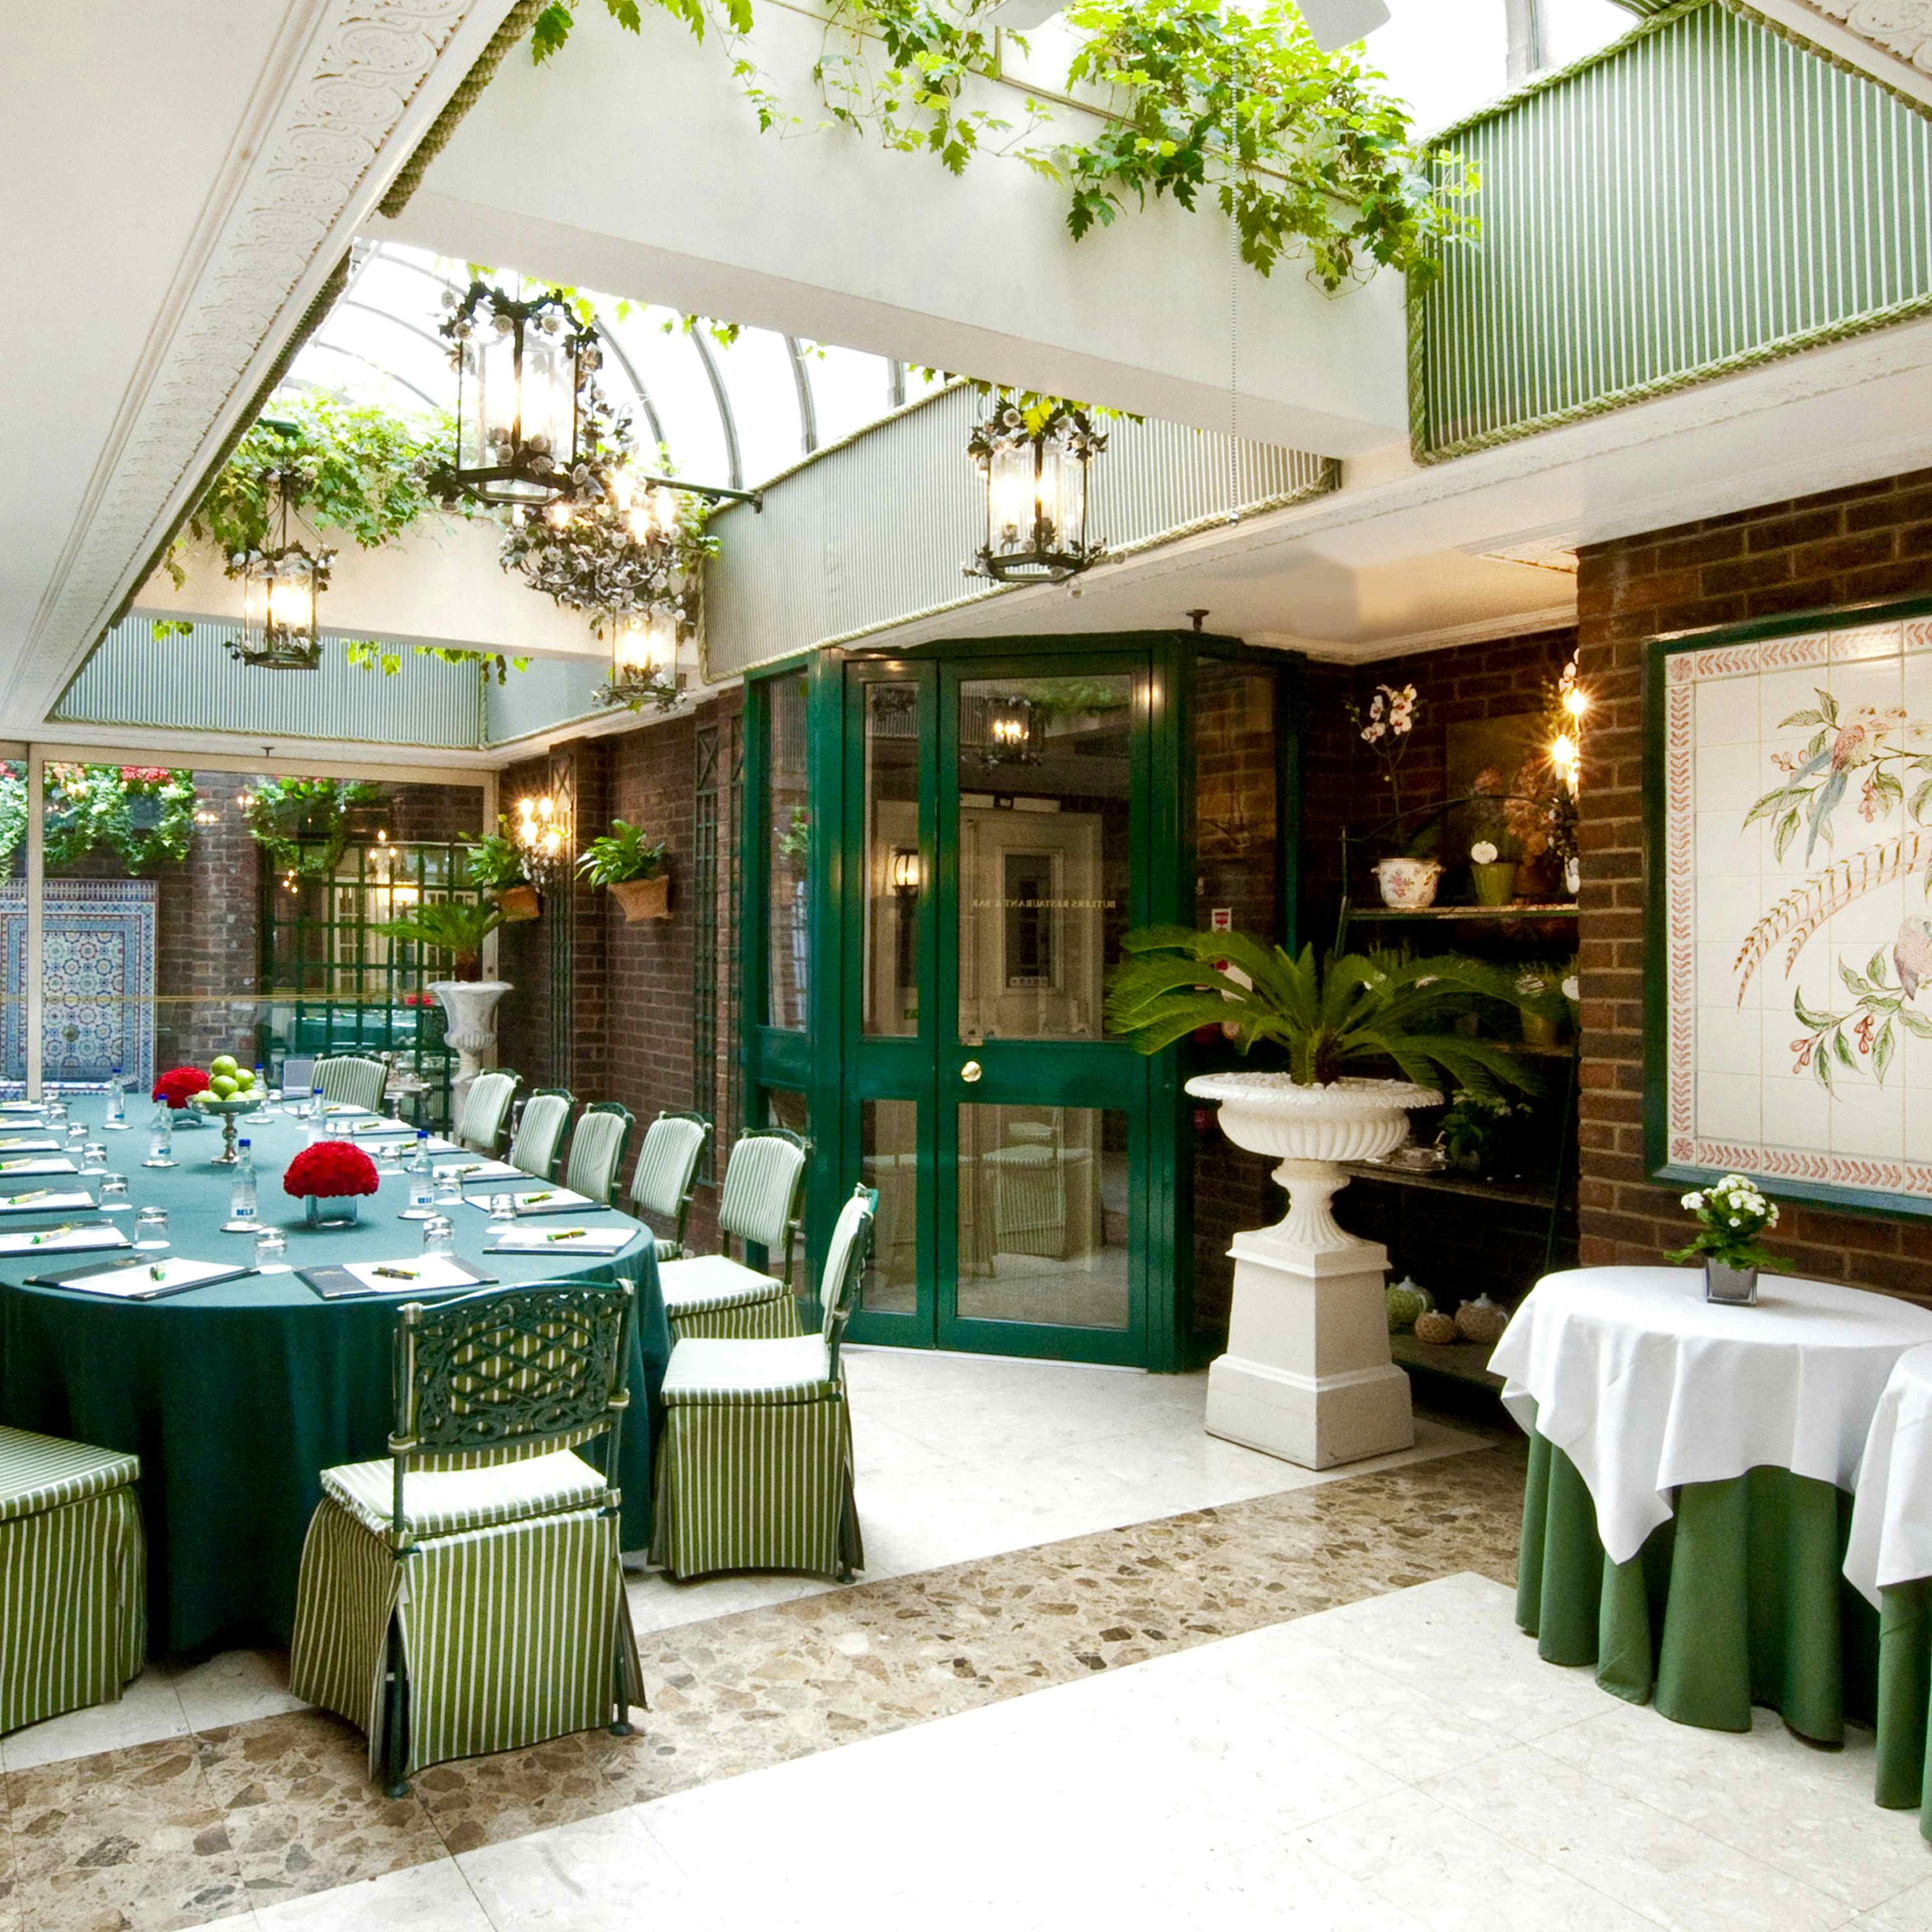 The Chesterfield Mayfair Hotel - The Conservatory image 2